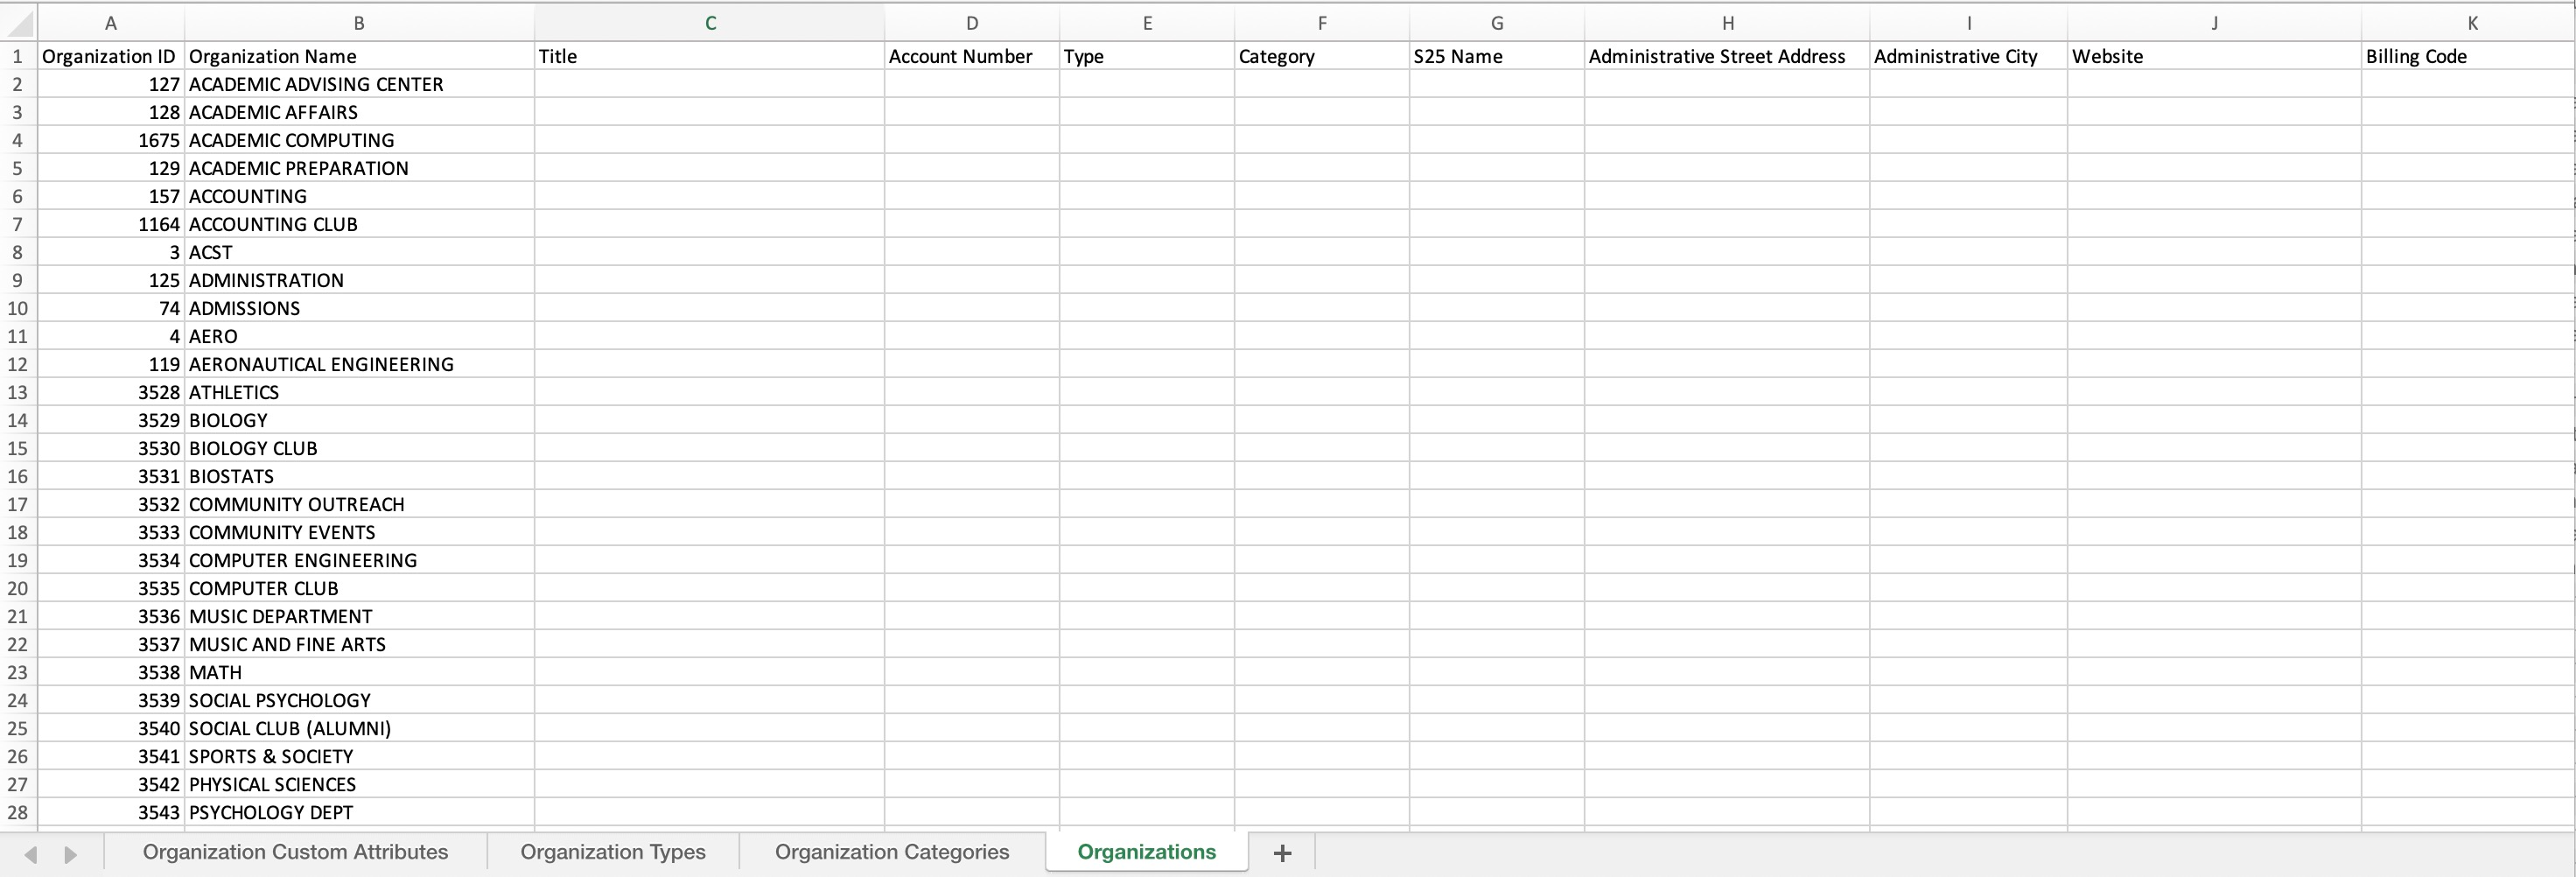 Import tool template organizations excel example